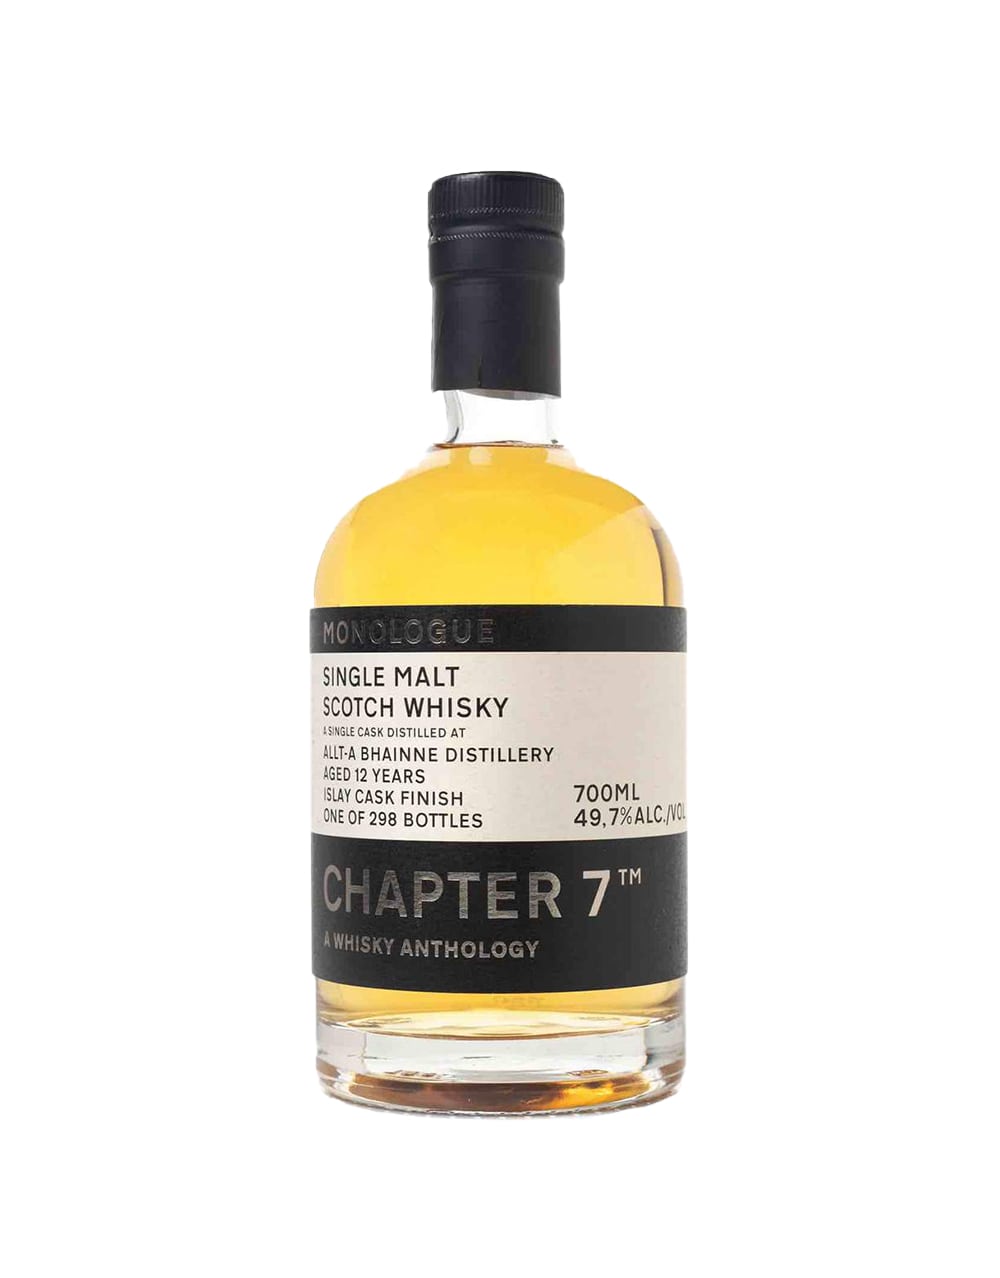 Chapter 7 Monologue Allt-a Bhainne 12 Year Old 2008 Scotch Whisky